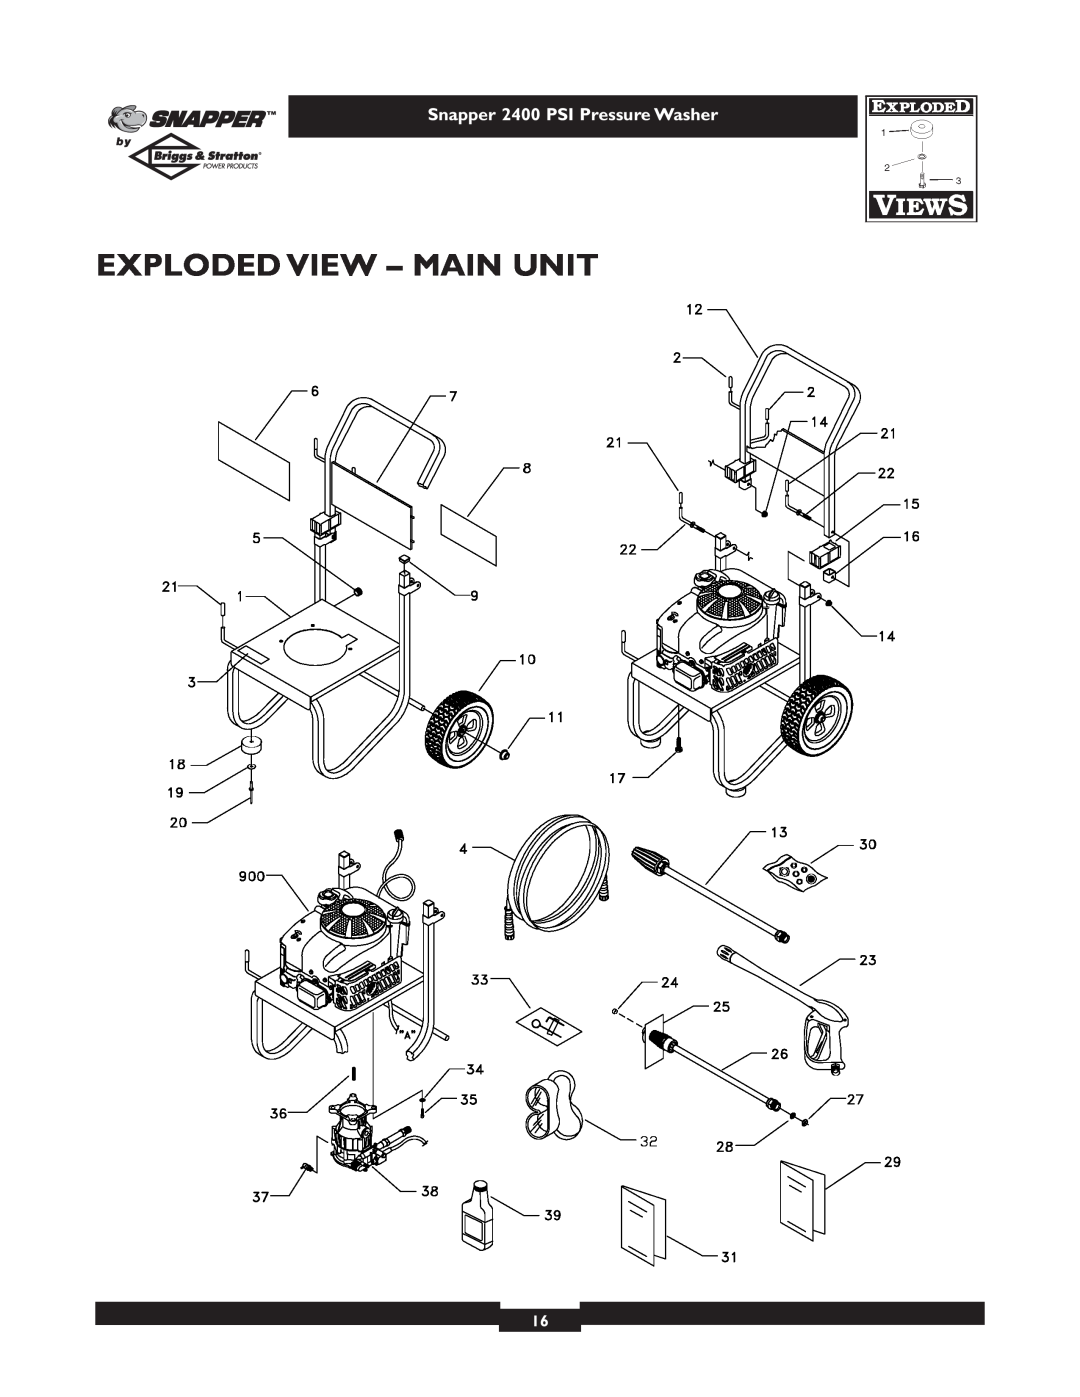 Snapper 1660-0 owner manual Exploded View - Main Unit, Snapper 2400 PSI Pressure Washer 